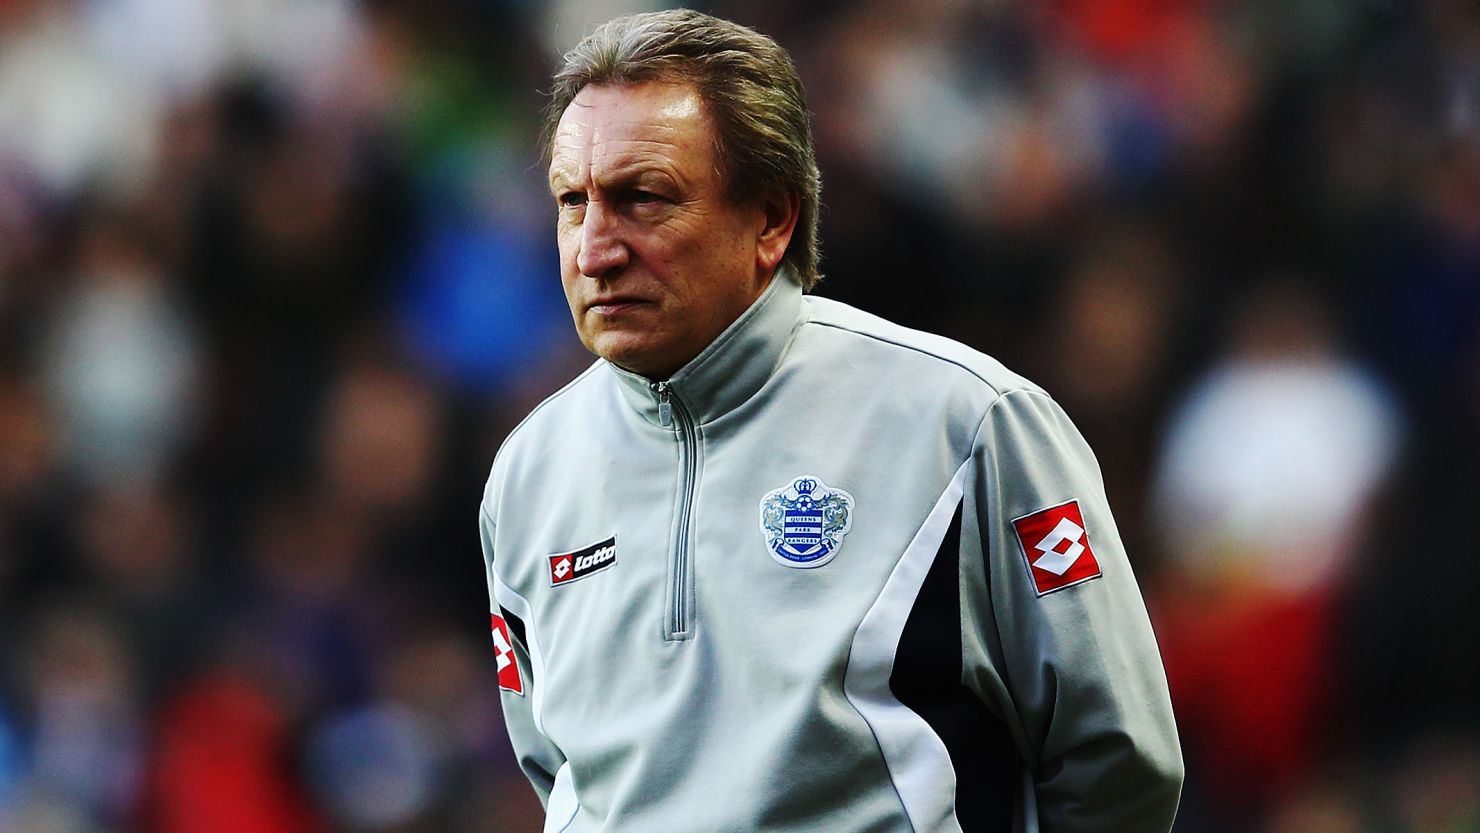 QPR manager Neil Warnock during his last game in charge of the club in an FA Cup tie against MK Dons.